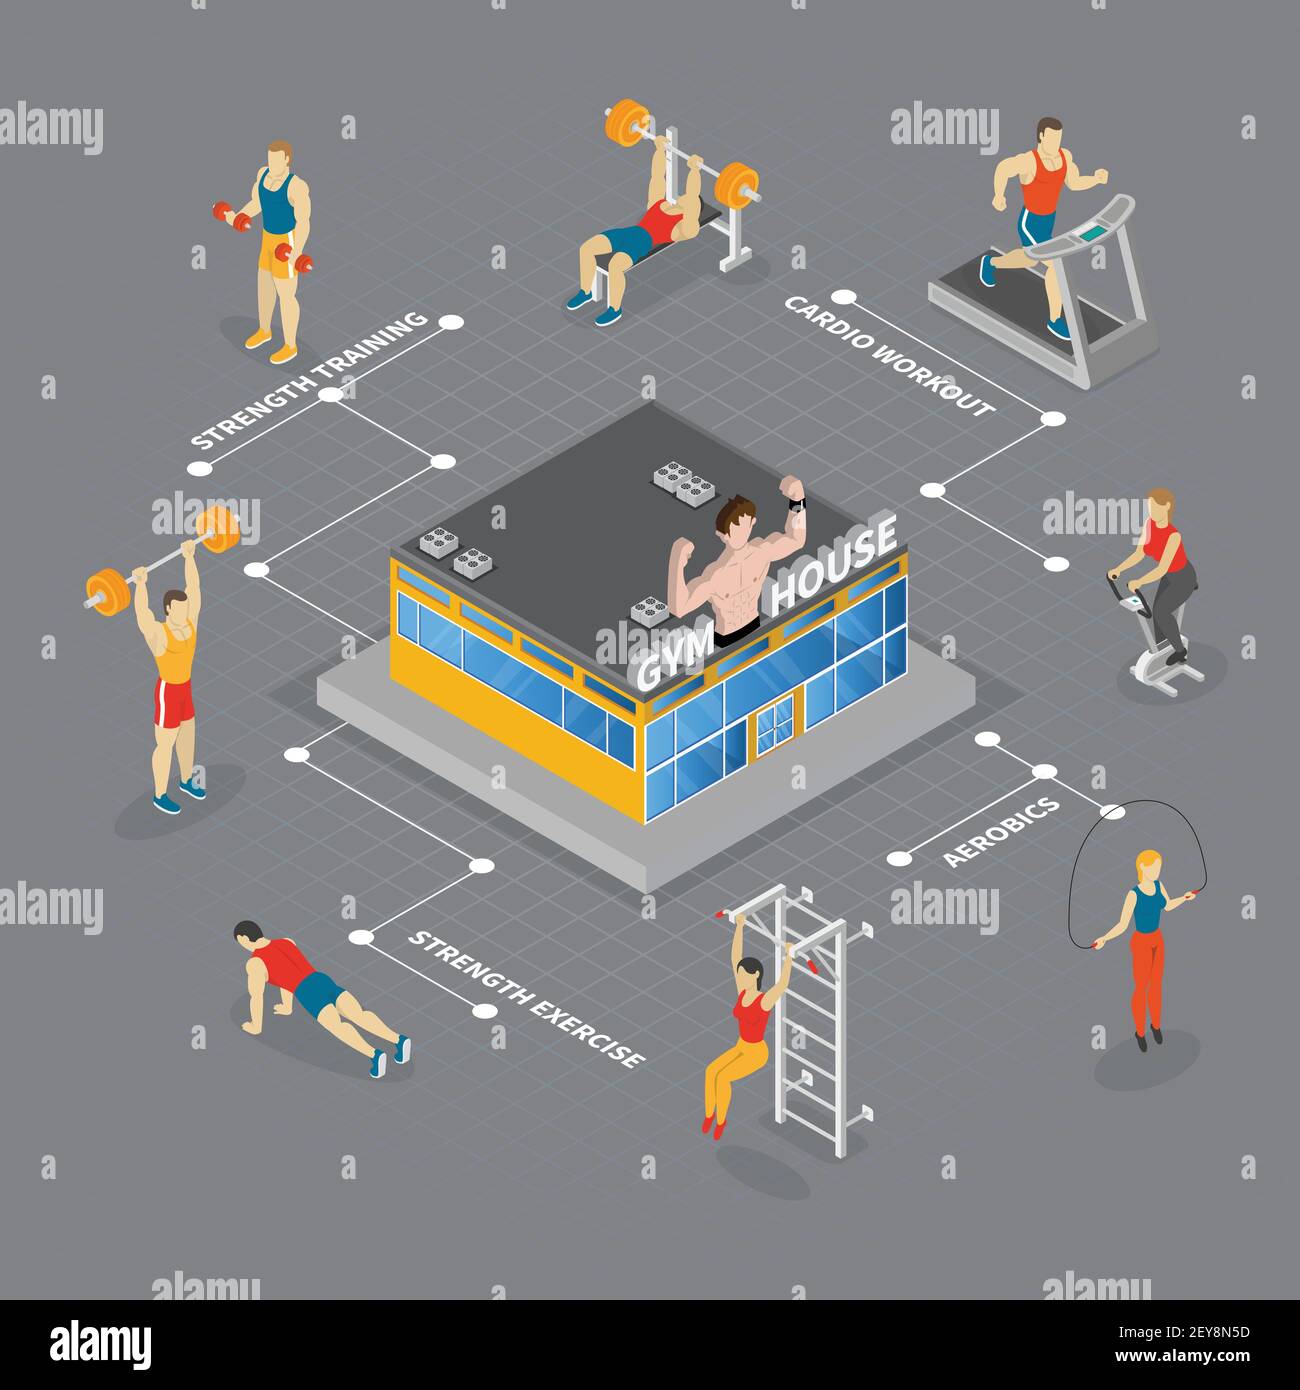 Fitness isometric flowchart with lines and text captions human characters of athletes and gym house building vector illustration Stock Vector